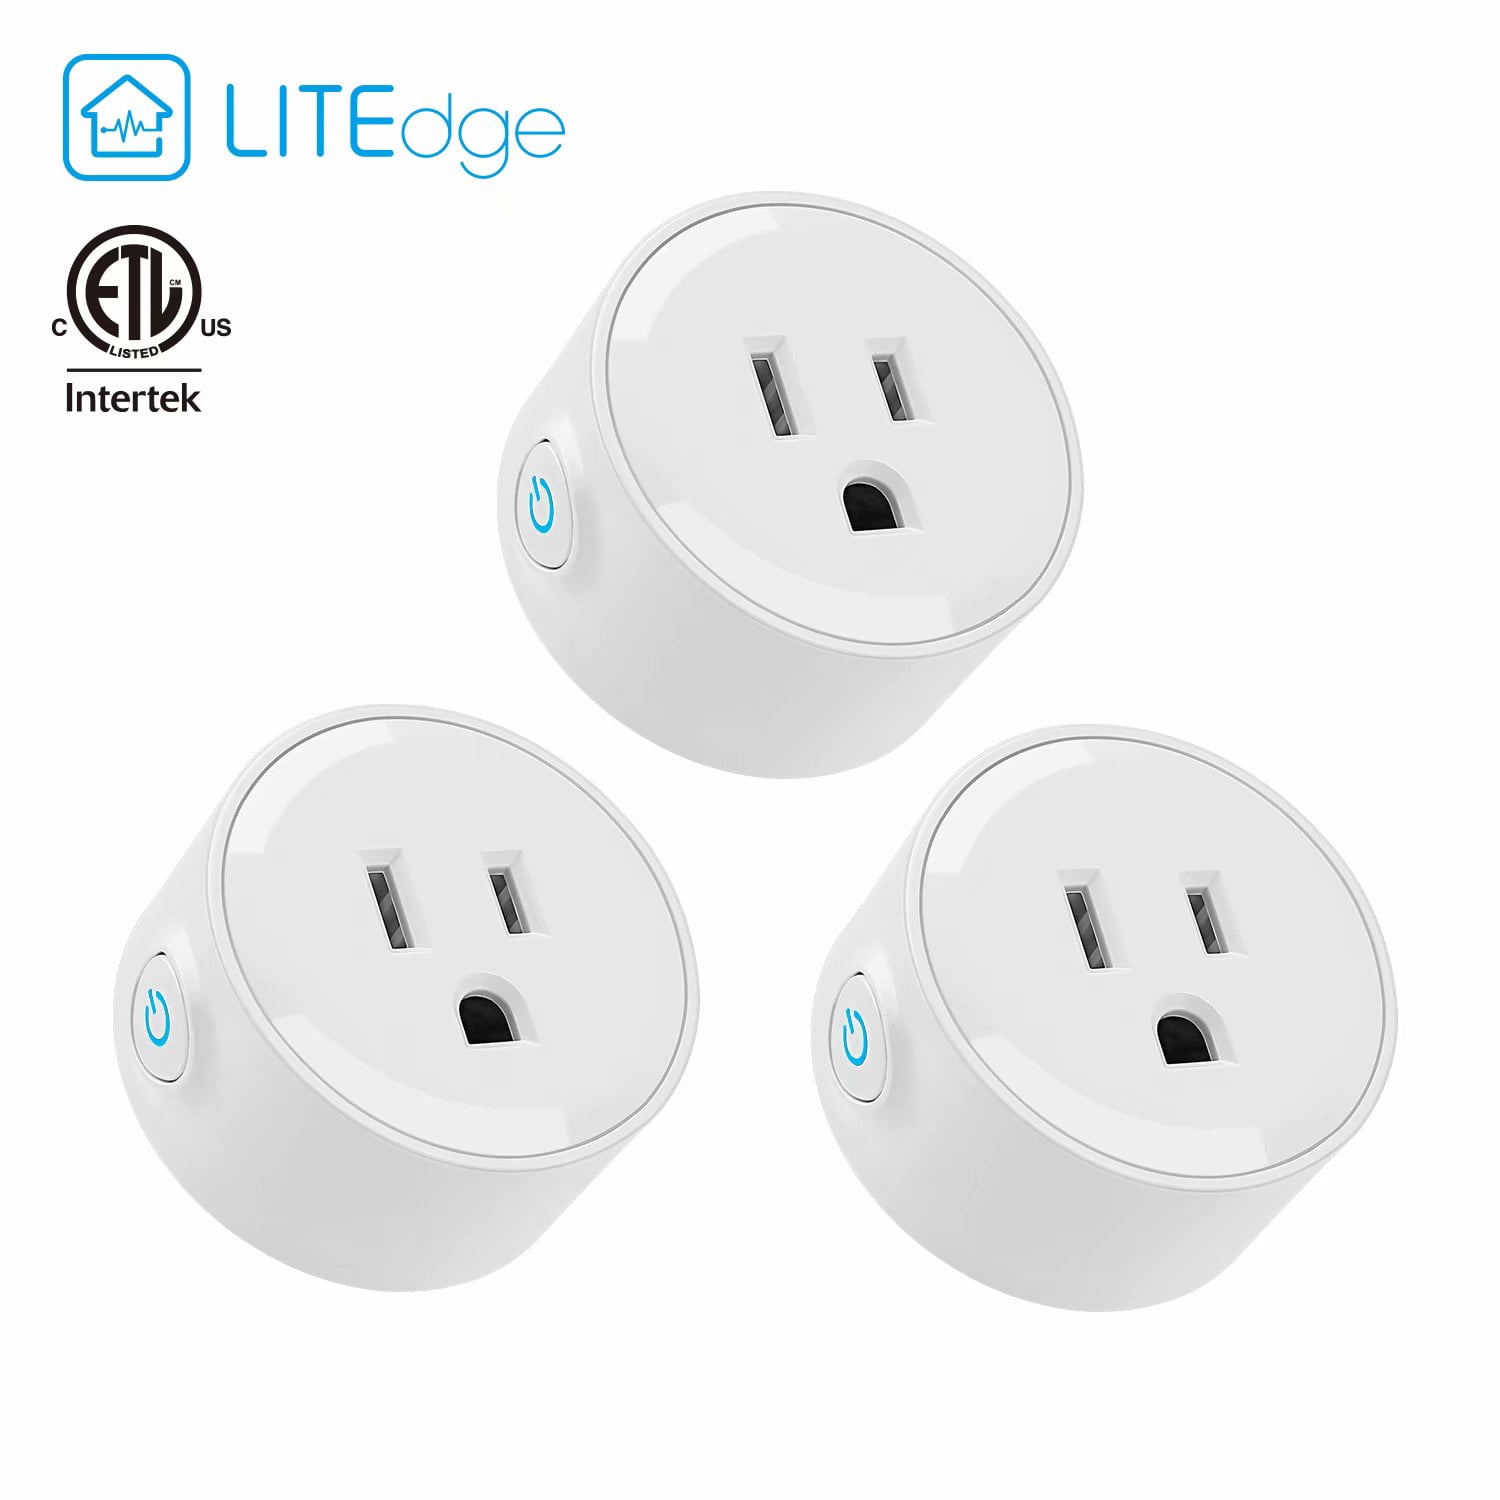 SONOFF S40 Lite 15A Zigbee Smart Plug with ETL Certified, Voice Control  Works with Alexa Google Home SmartThings, 2-Pack